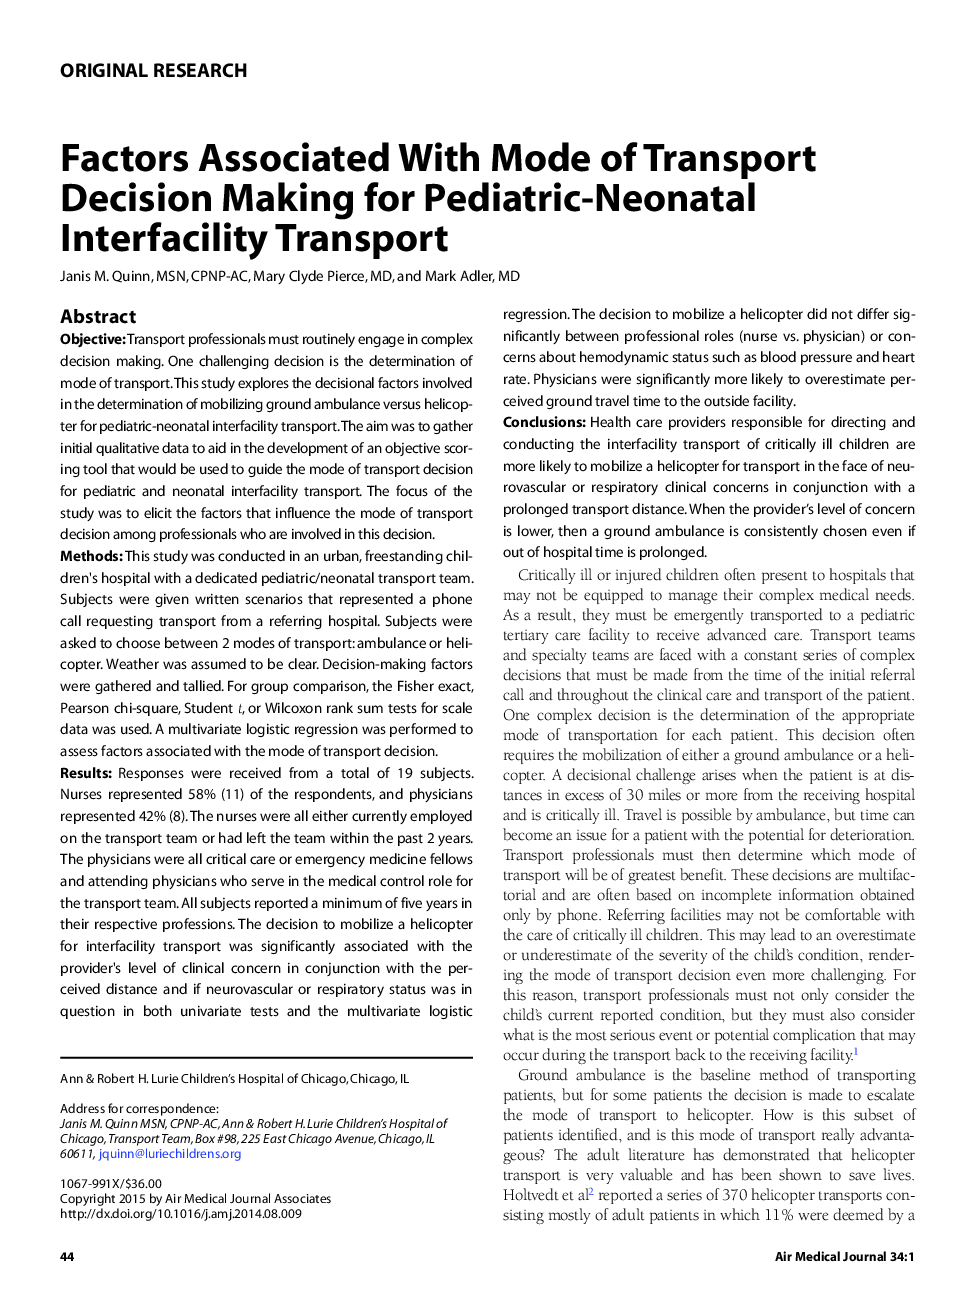 Factors Associated With Mode of Transport Decision Making for Pediatric-Neonatal Interfacility Transport